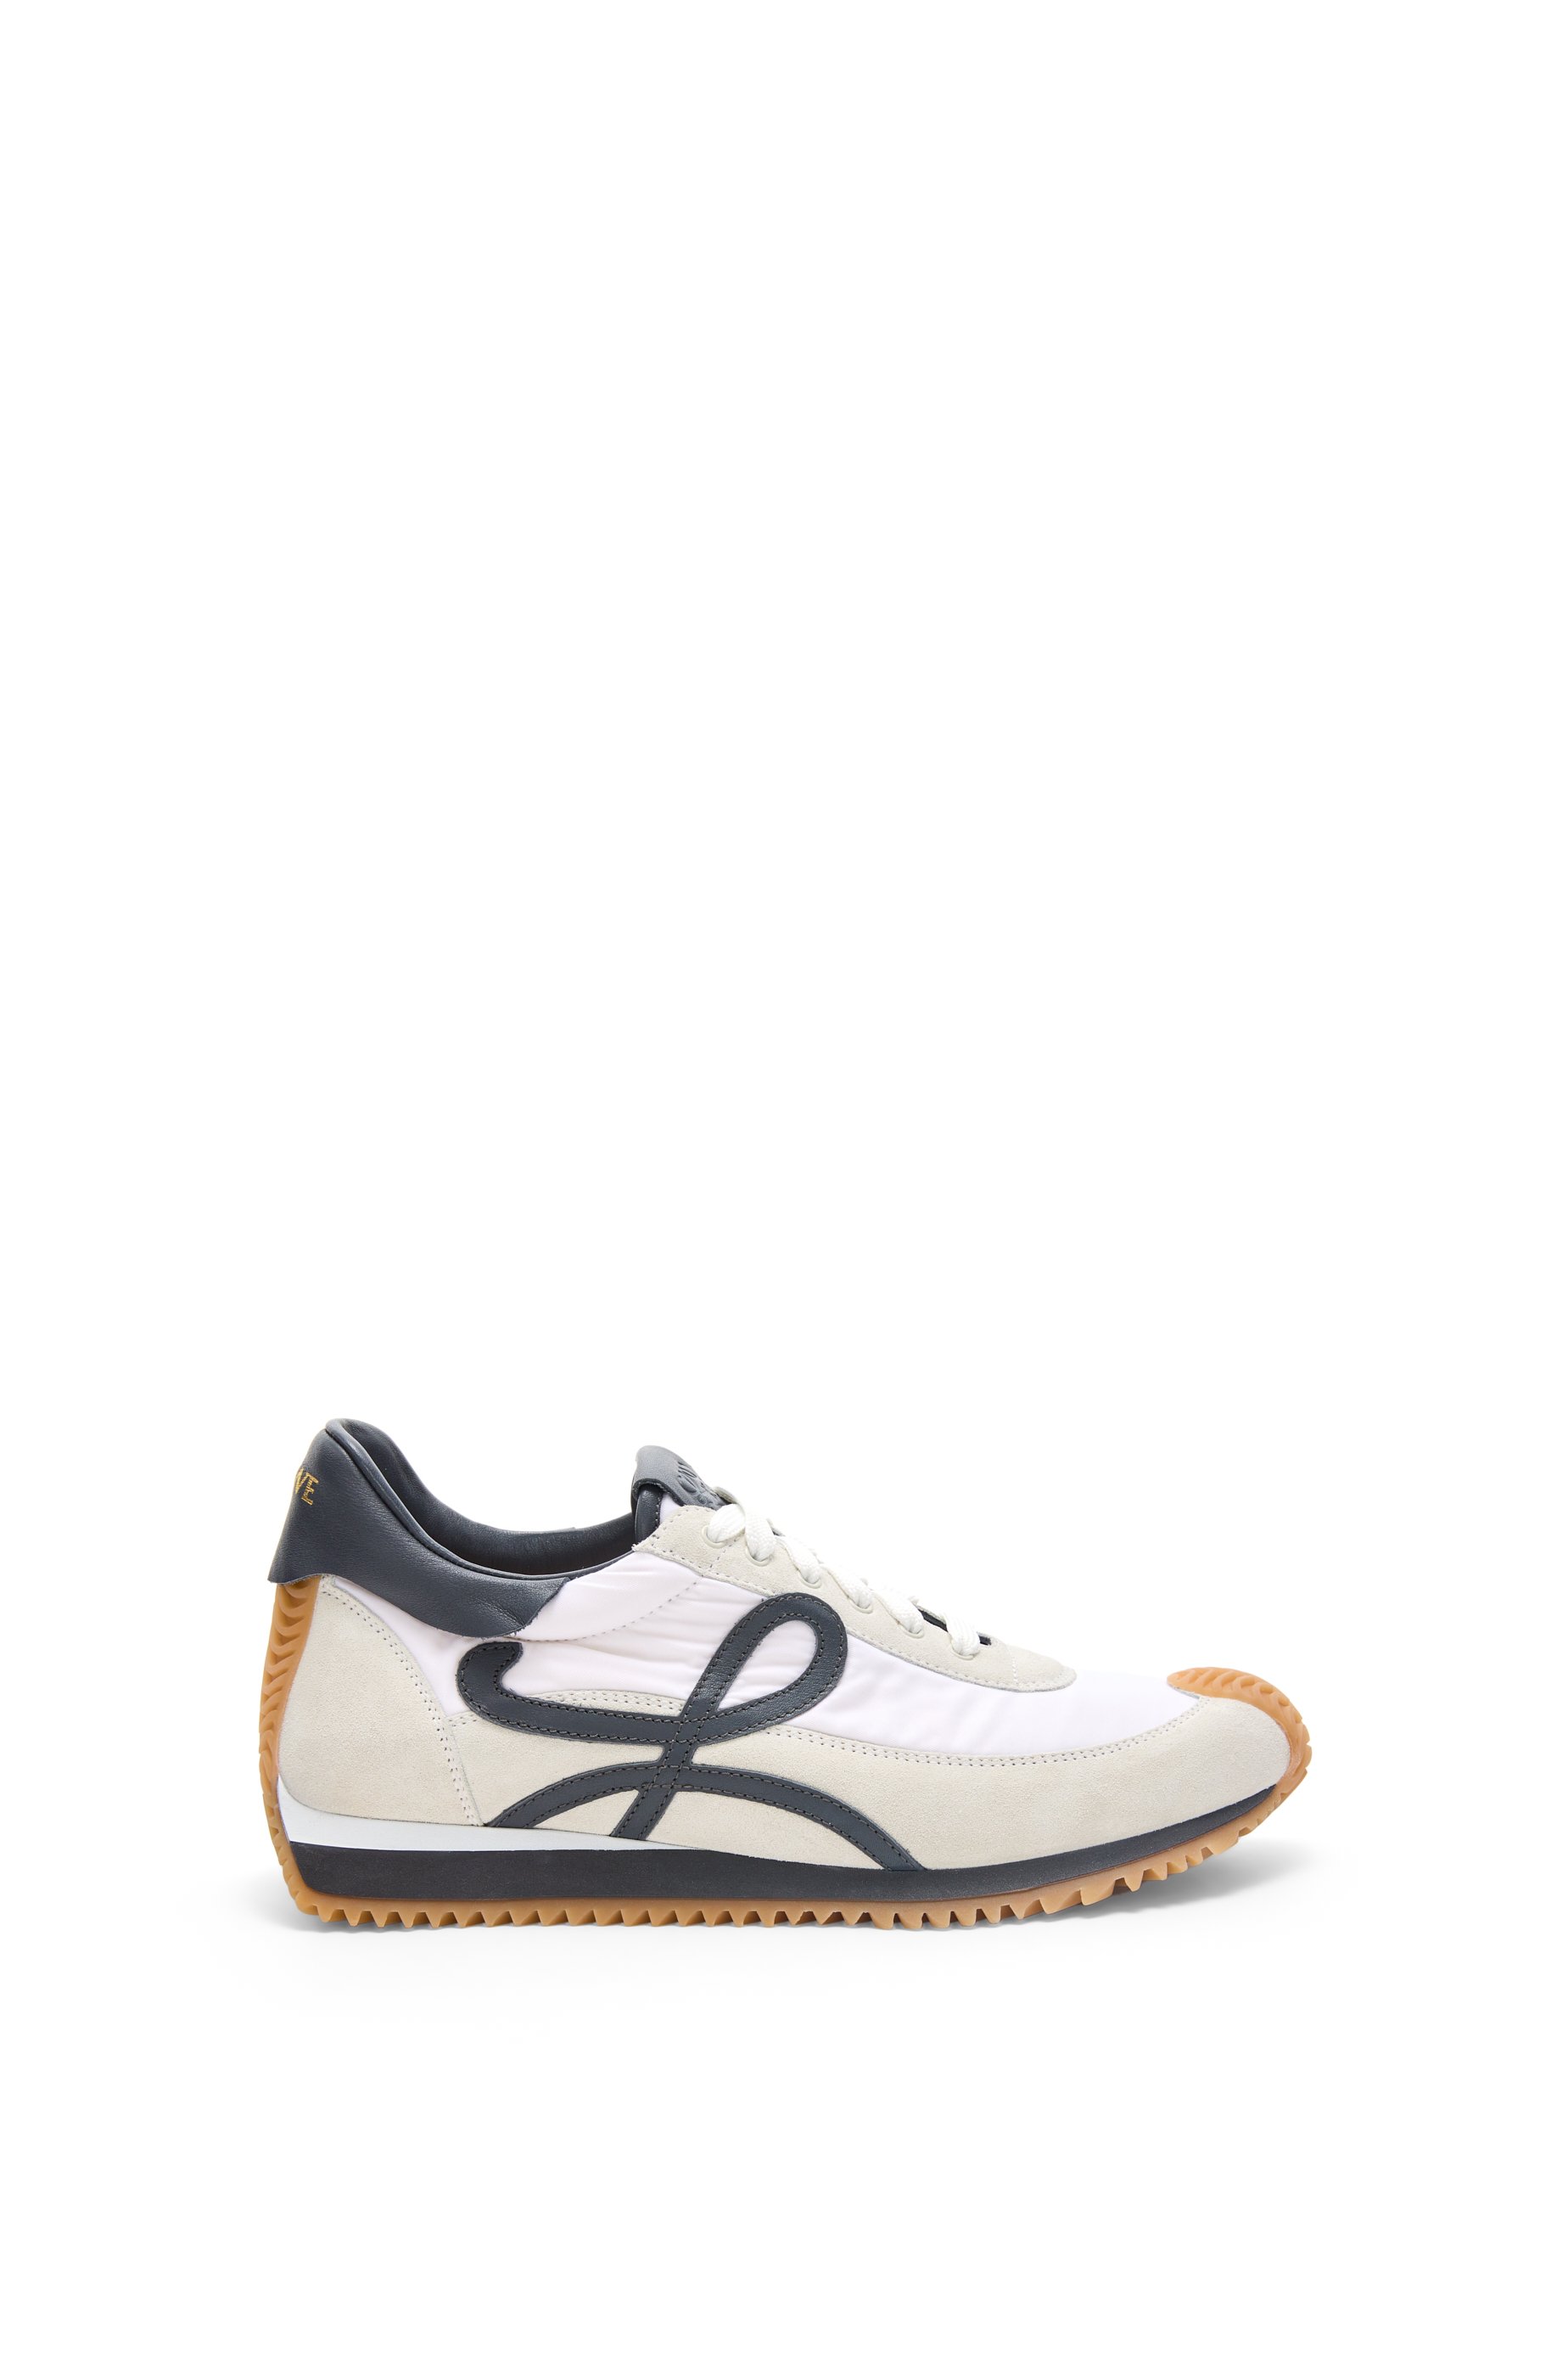 Flow Runner in nylon and suede Blue Anthracite/White - LOEWE